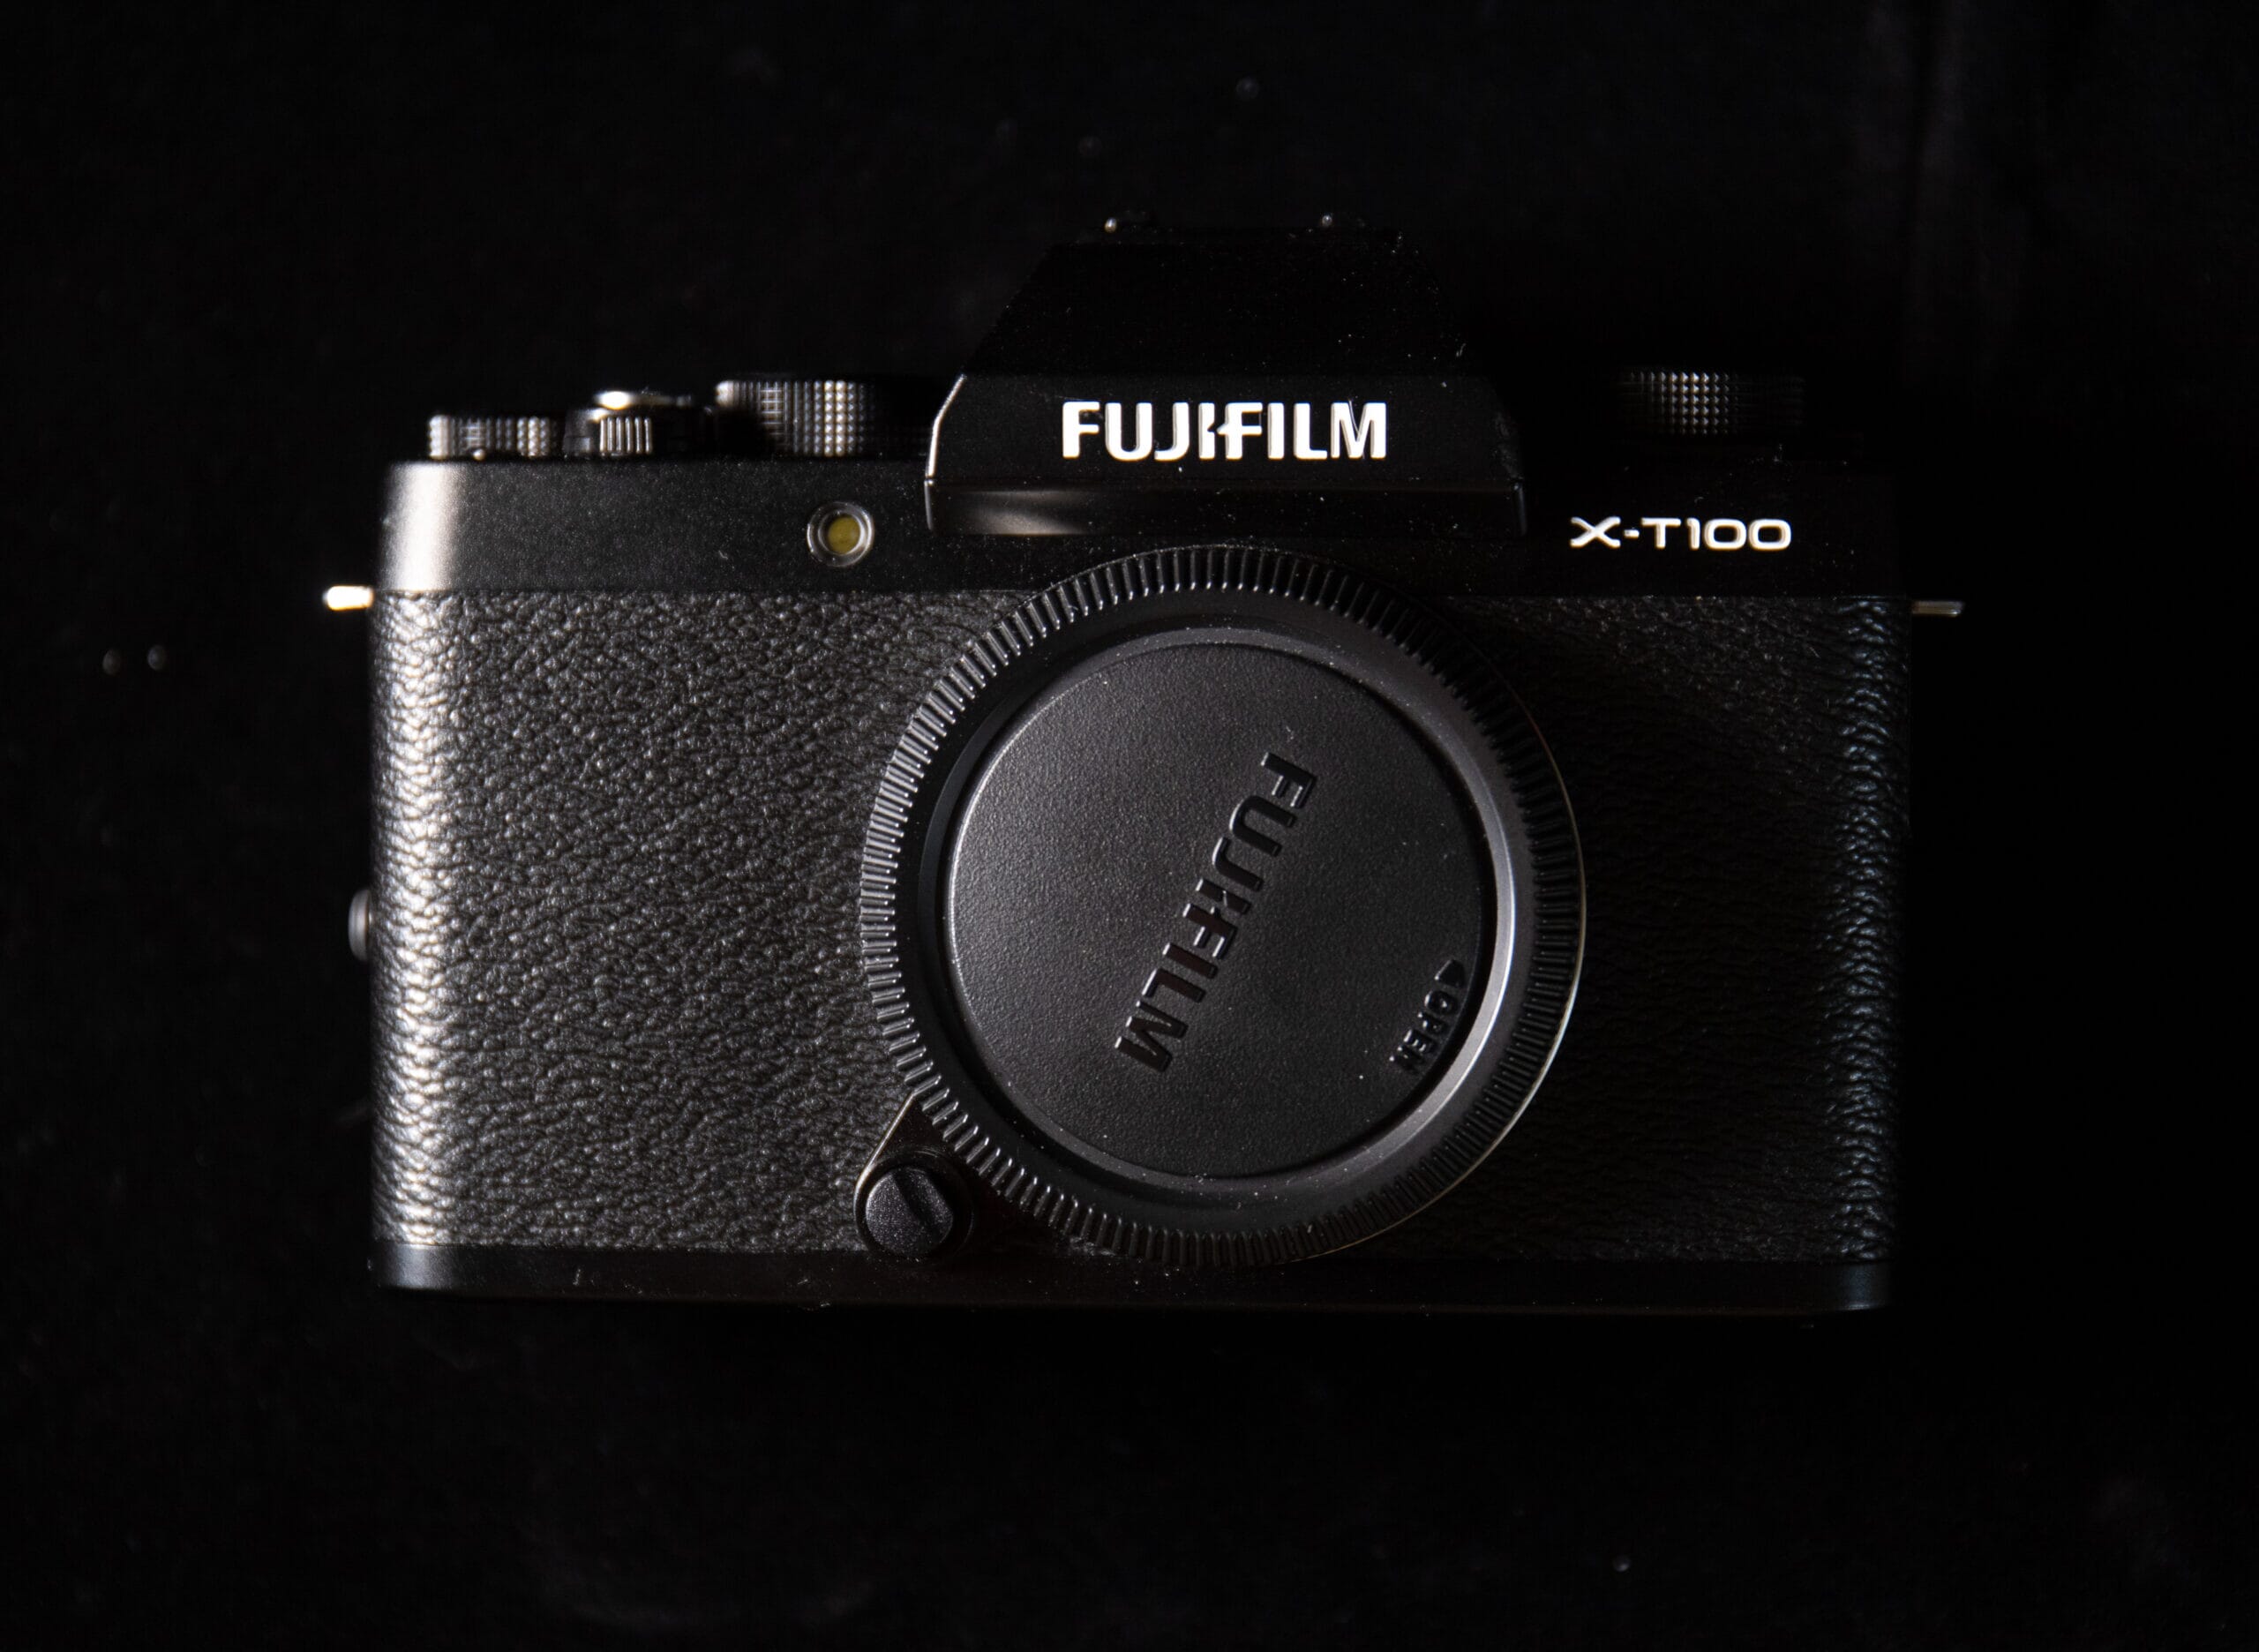 Fujifilm X-T100 Review: A Well-Priced Mirrorless Camera for Beginners